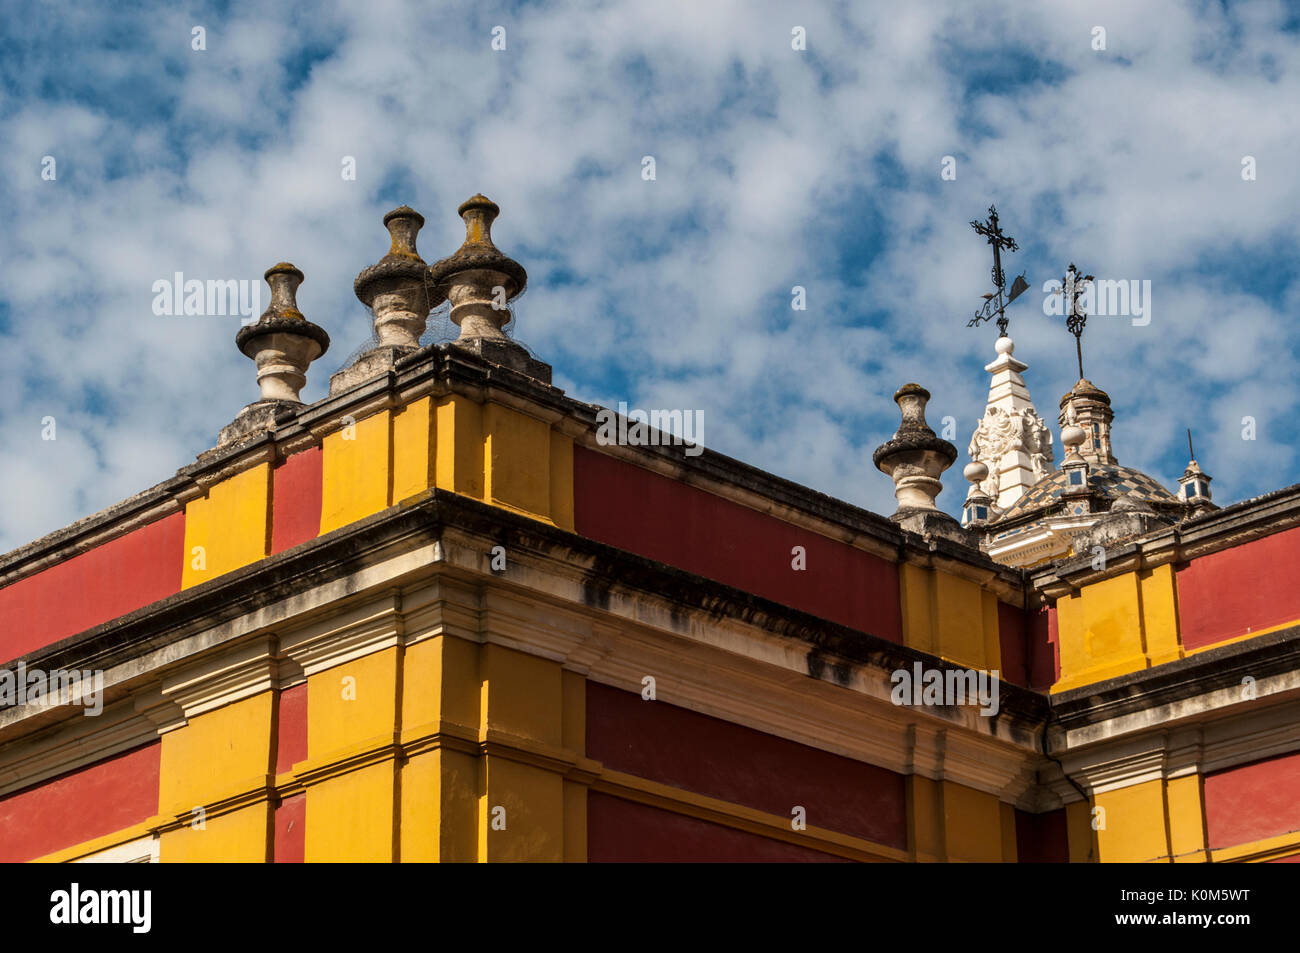 Spain: the skyline and saturated colors, typical of Seville, seen on the external wall of the the Alcazar, the famous royal palace of the city Stock Photo